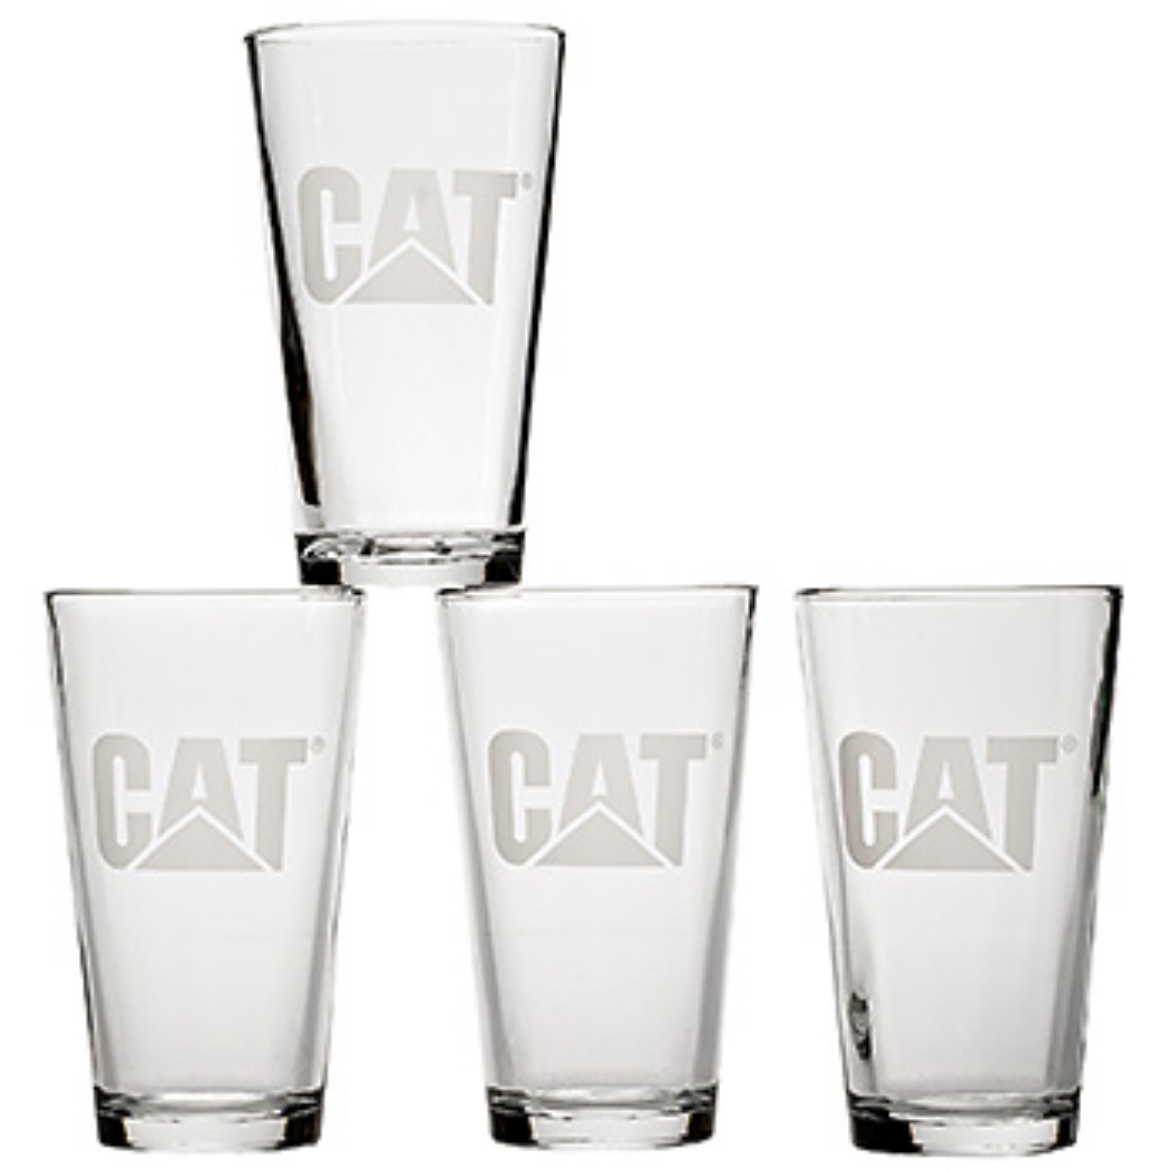 Set of 4 Cat and Yarn Glasses Drinking Glasses, Water Glasses, Cat Glasses,  Cat Glassware, Cats, Cat Glass, Cat Lover, Drinkware 